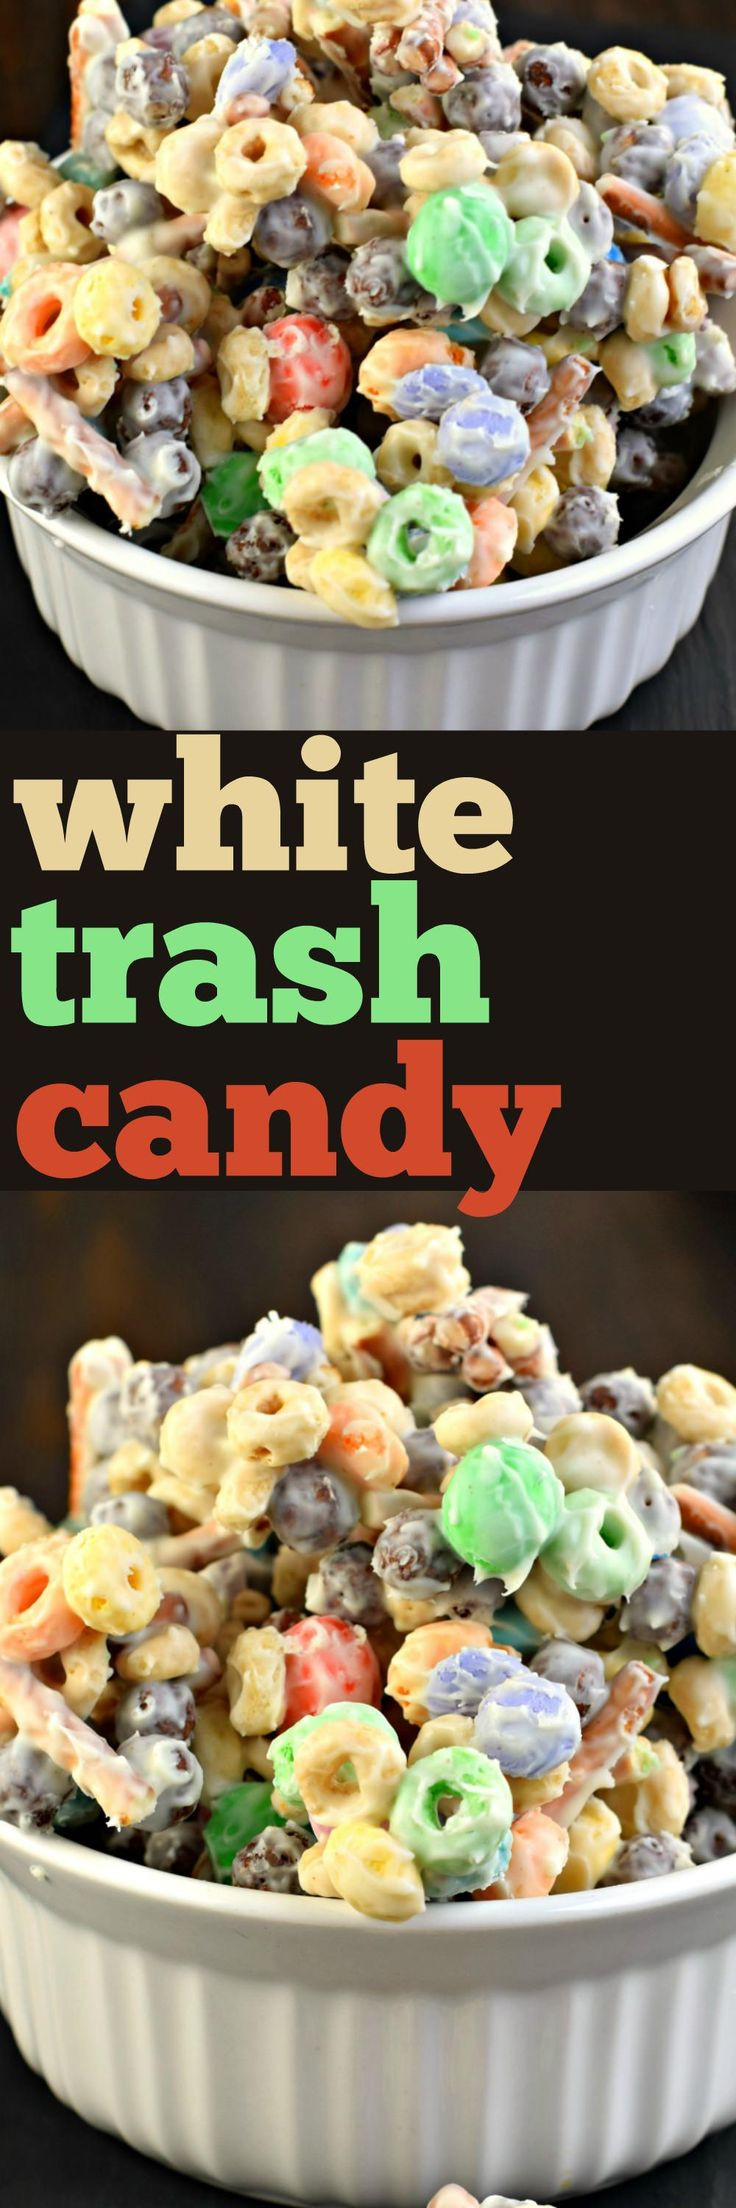 White Trash Christmas Candy
 17 Best ideas about White Trash Recipe on Pinterest